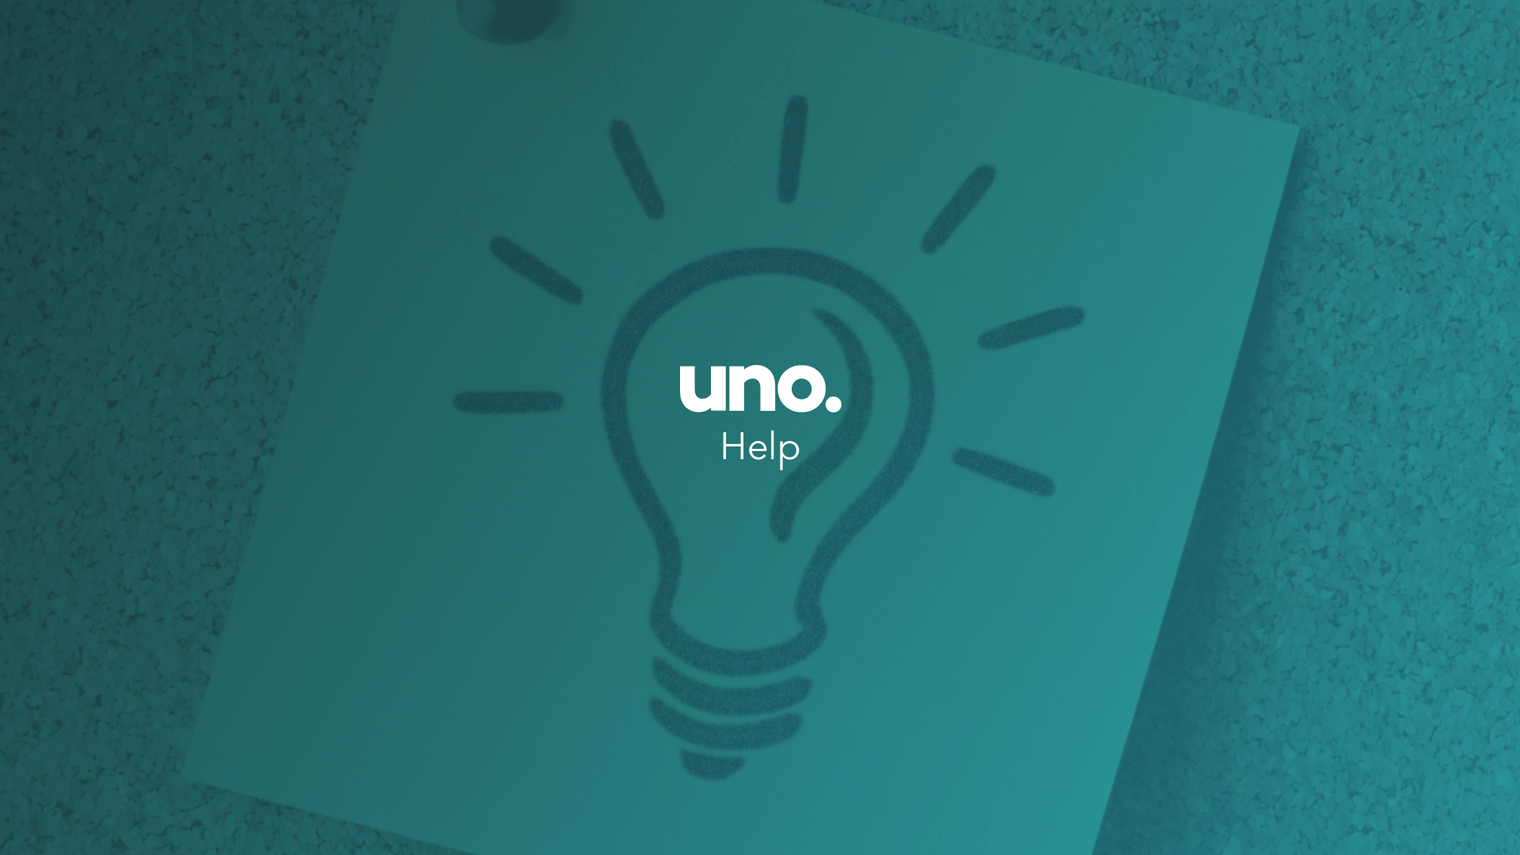 Which borrowers will benefit from using uno? What loans are available?